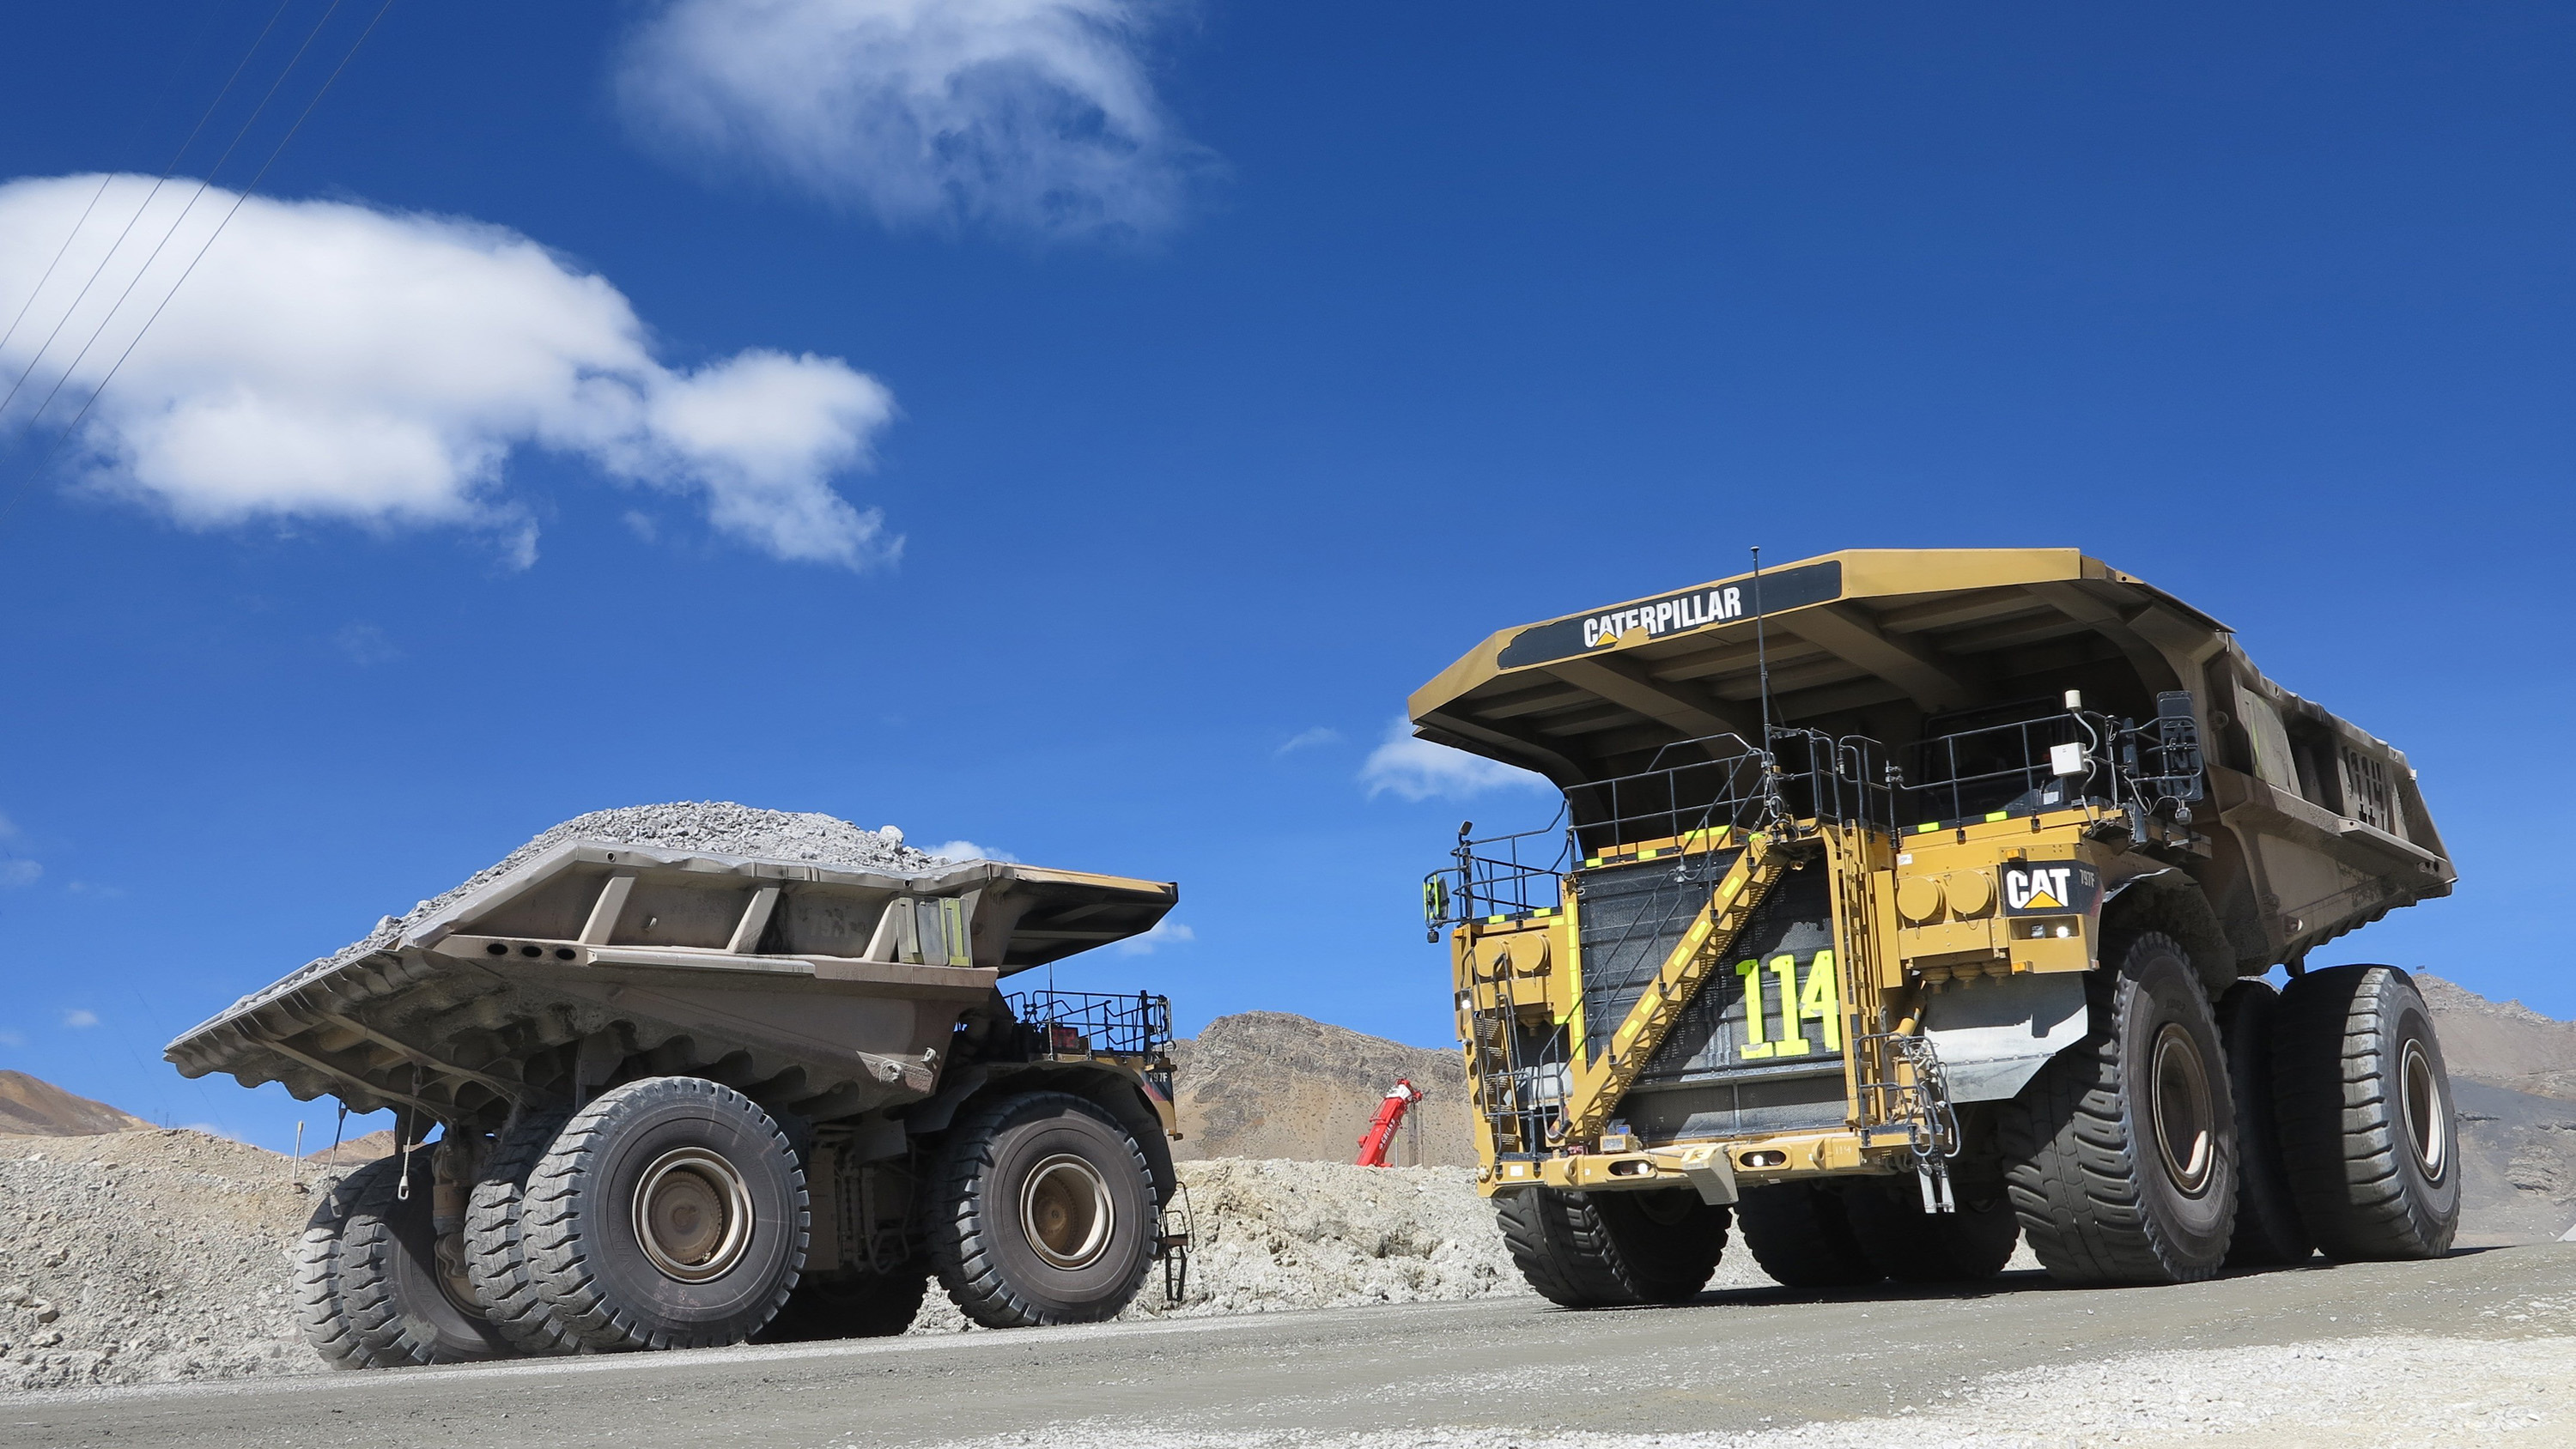 Huge dump trucks carry ore on July 15, 2015 at the Toromocho Mine in the central Peruvian Andes. The open-pit copper mine, owned and operated by the Aluminum Corporation of China, is one of a growing number of Chinese investments across Latin America. (Tim Johnson/McClatchy/TNS)